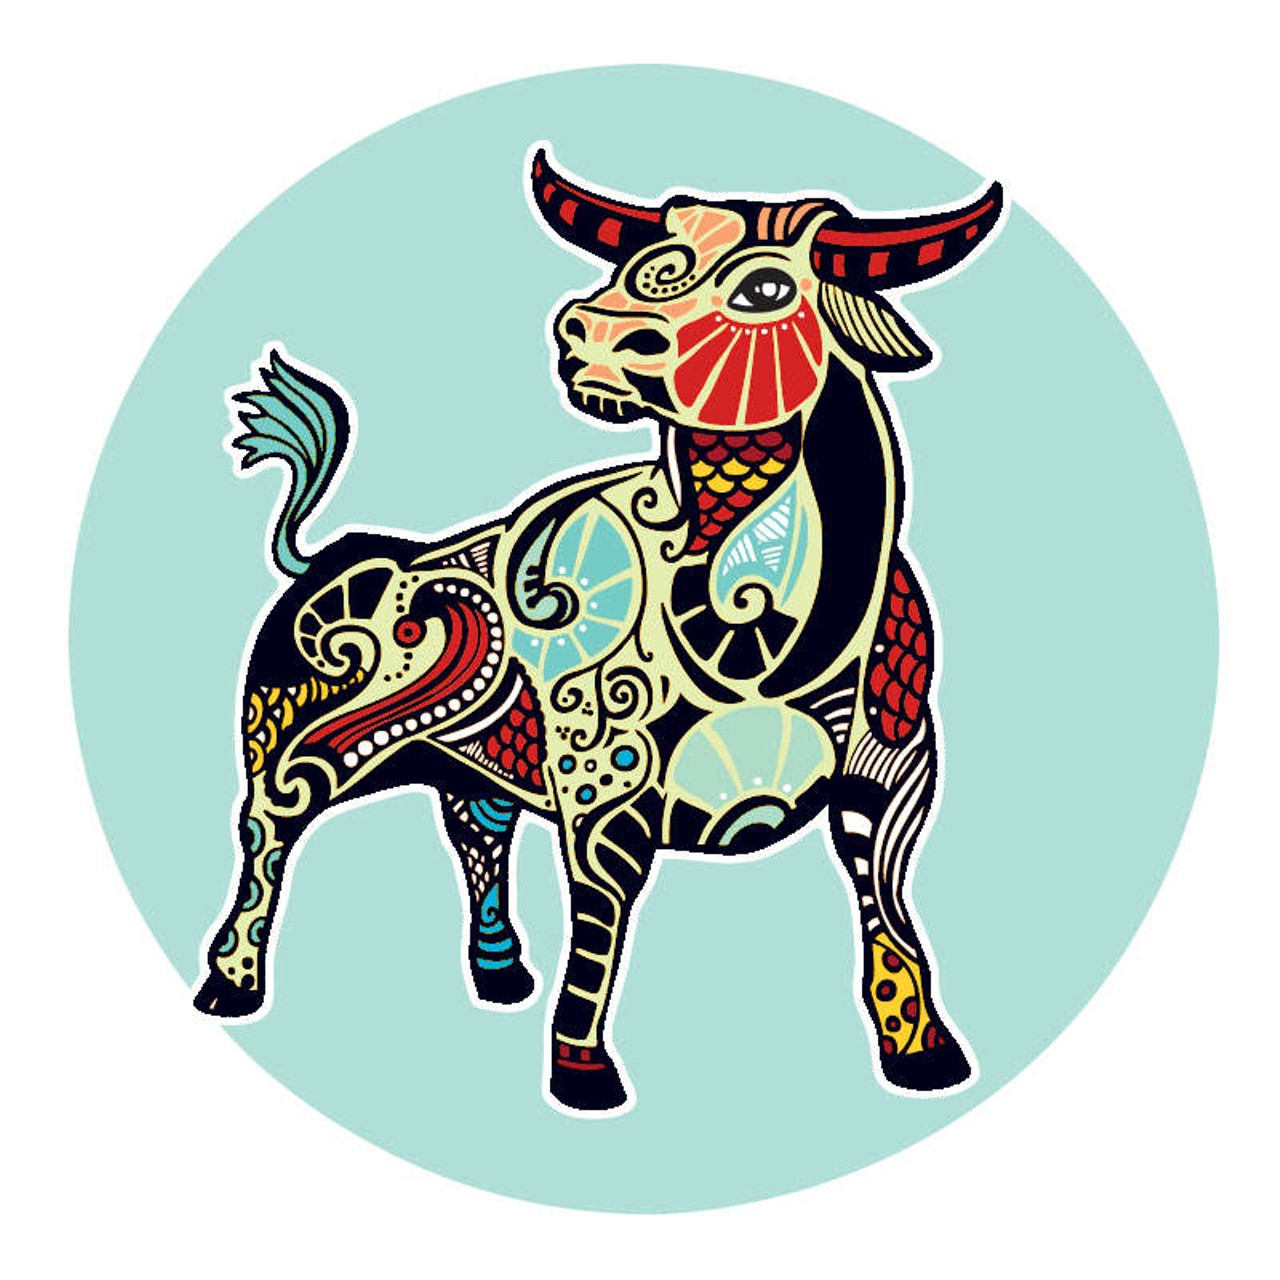 TAURUS: April 21 &#150; May 20
You have opened your eyes just enough to make room for more light to enter. As your plans unfold it will be interesting to see what comes with them. You think you're ready for it &#151; maybe you are, maybe you aren&#146;t. Karma doesn't become clear until we get there. You know what it's taken to make these changes. What's left to do will go better once you let go of your monetary fears. That piece, along with the specter of your parents monitoring your dreams on some deep, subliminal level, makes this a pivotal time. Waking up to yourself will be worth whatever it costs you.